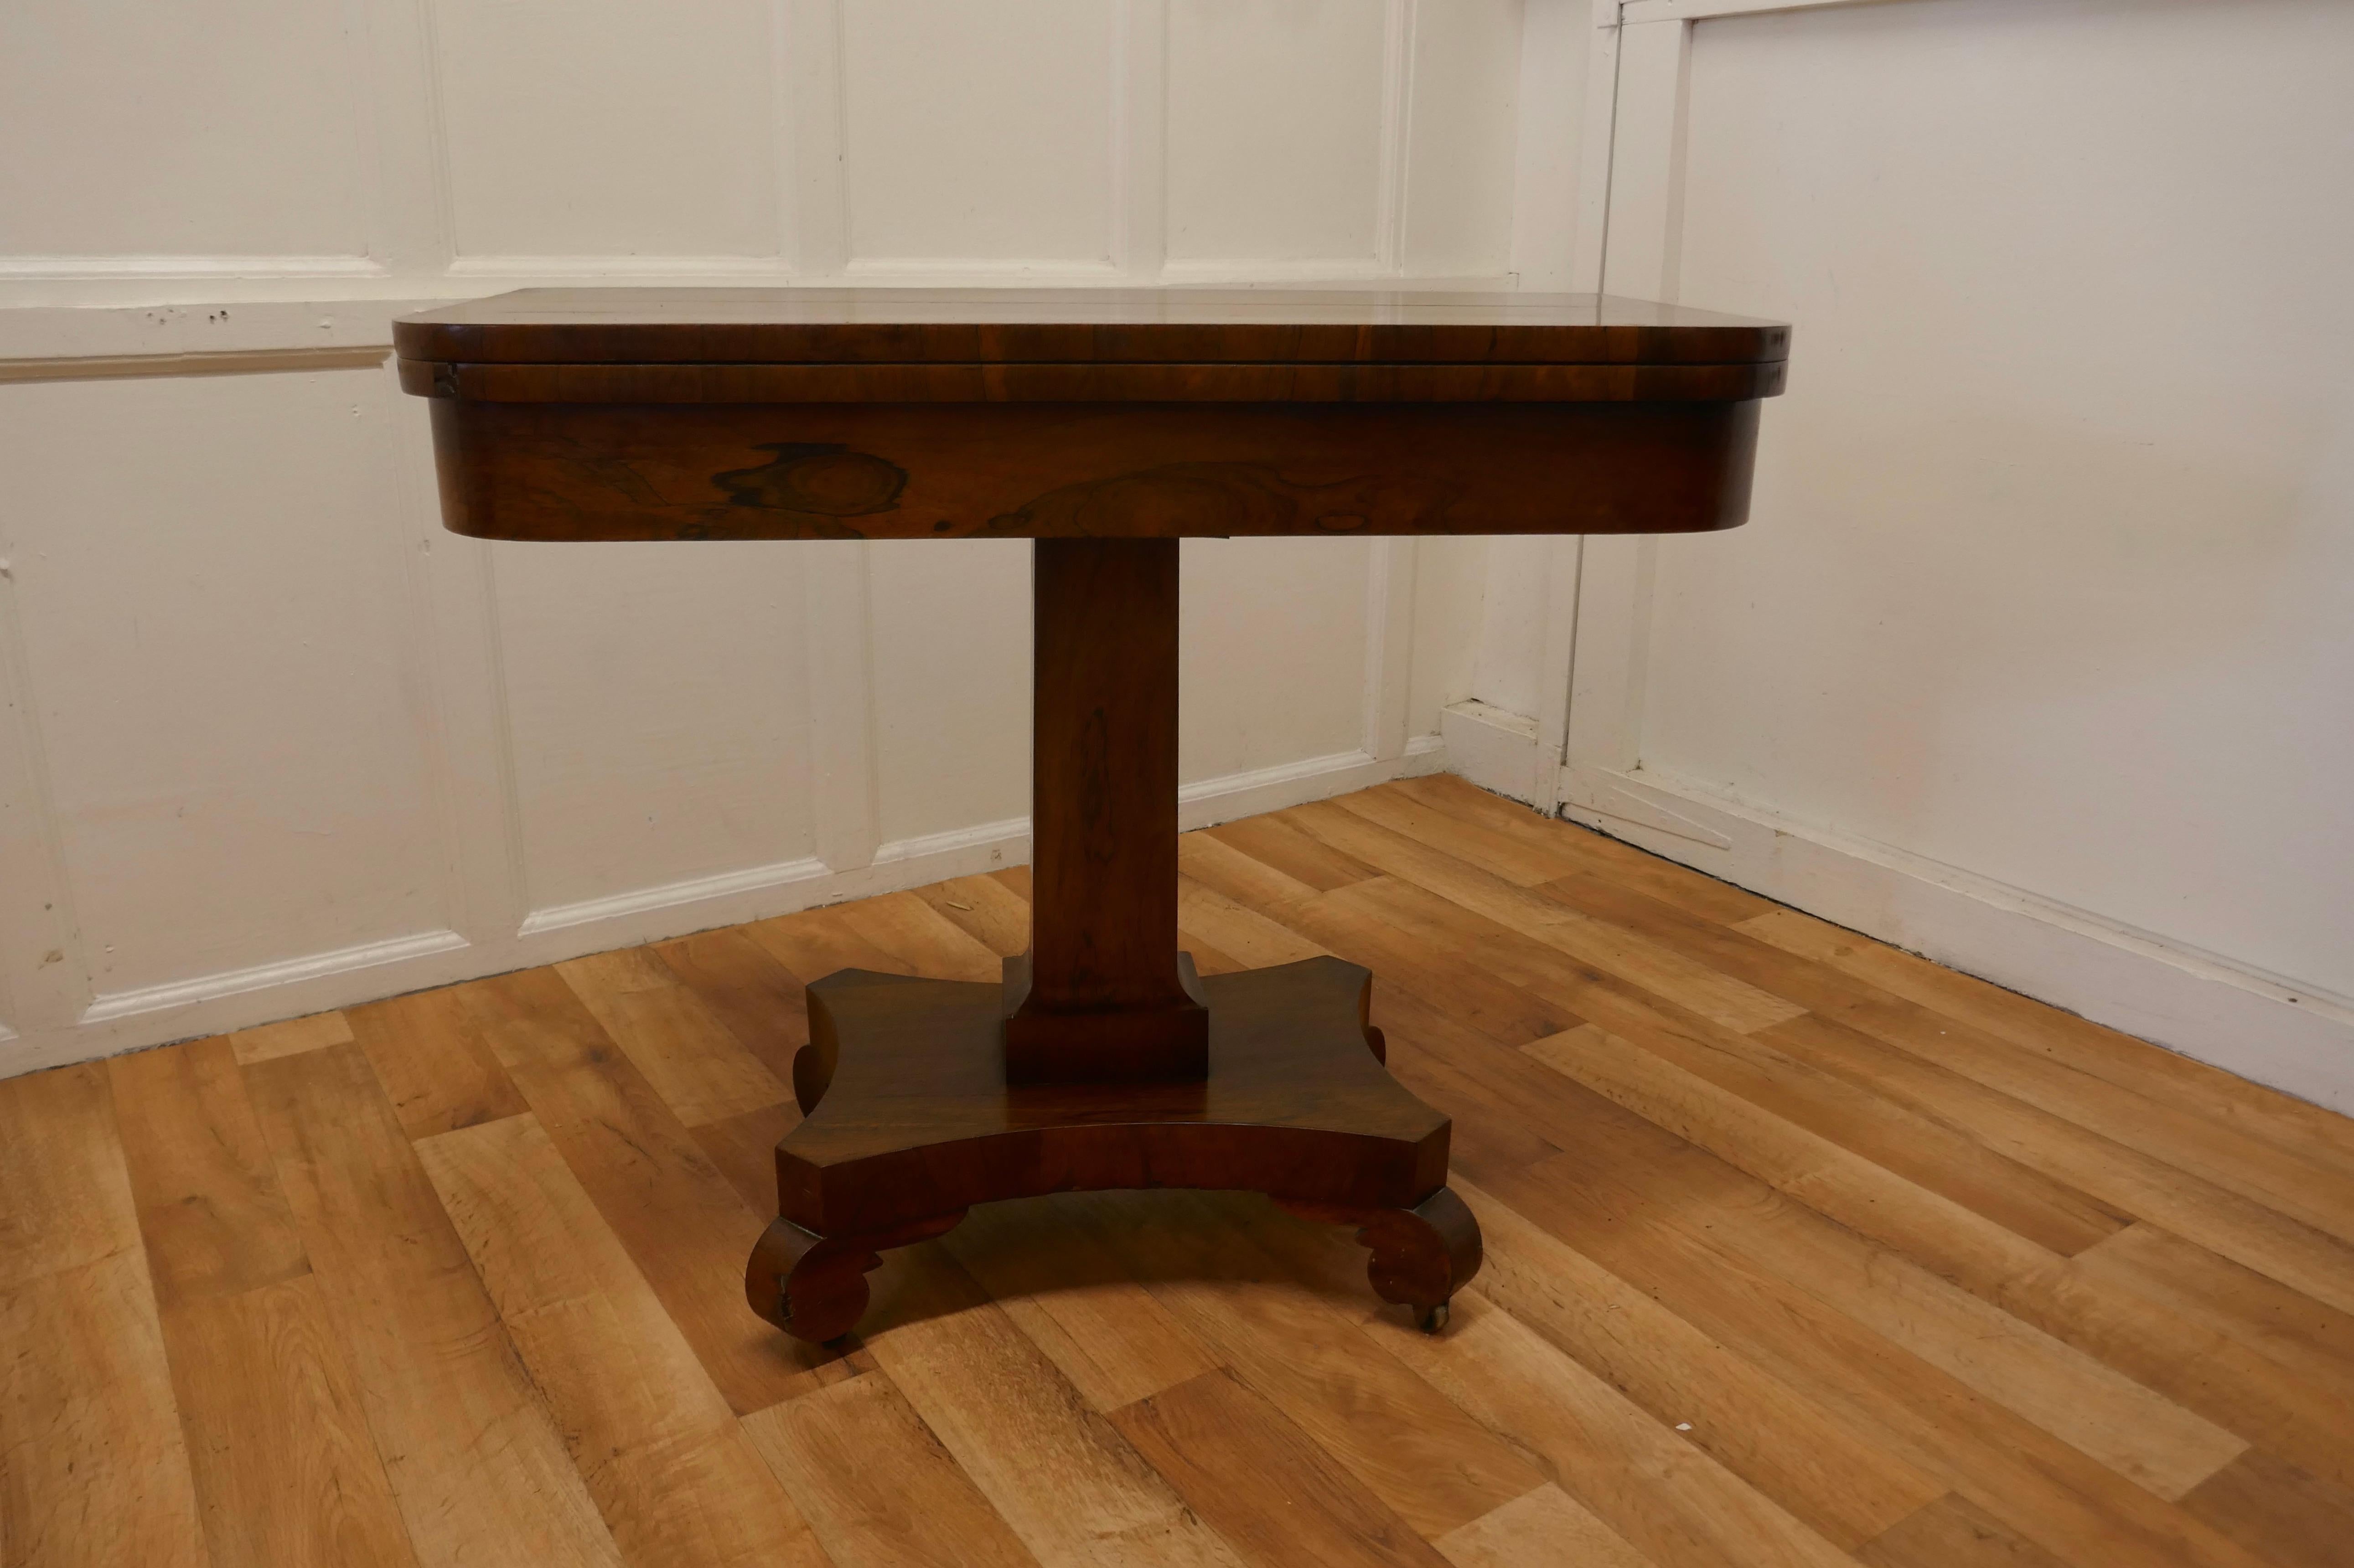 William IV folding games or card table.

This is a good quality piece with beautiful patina, it takes up little space and unfolds to a 3ft square games table.
The base has a 4 point base with scroll feet and the top swivels to open out.

The